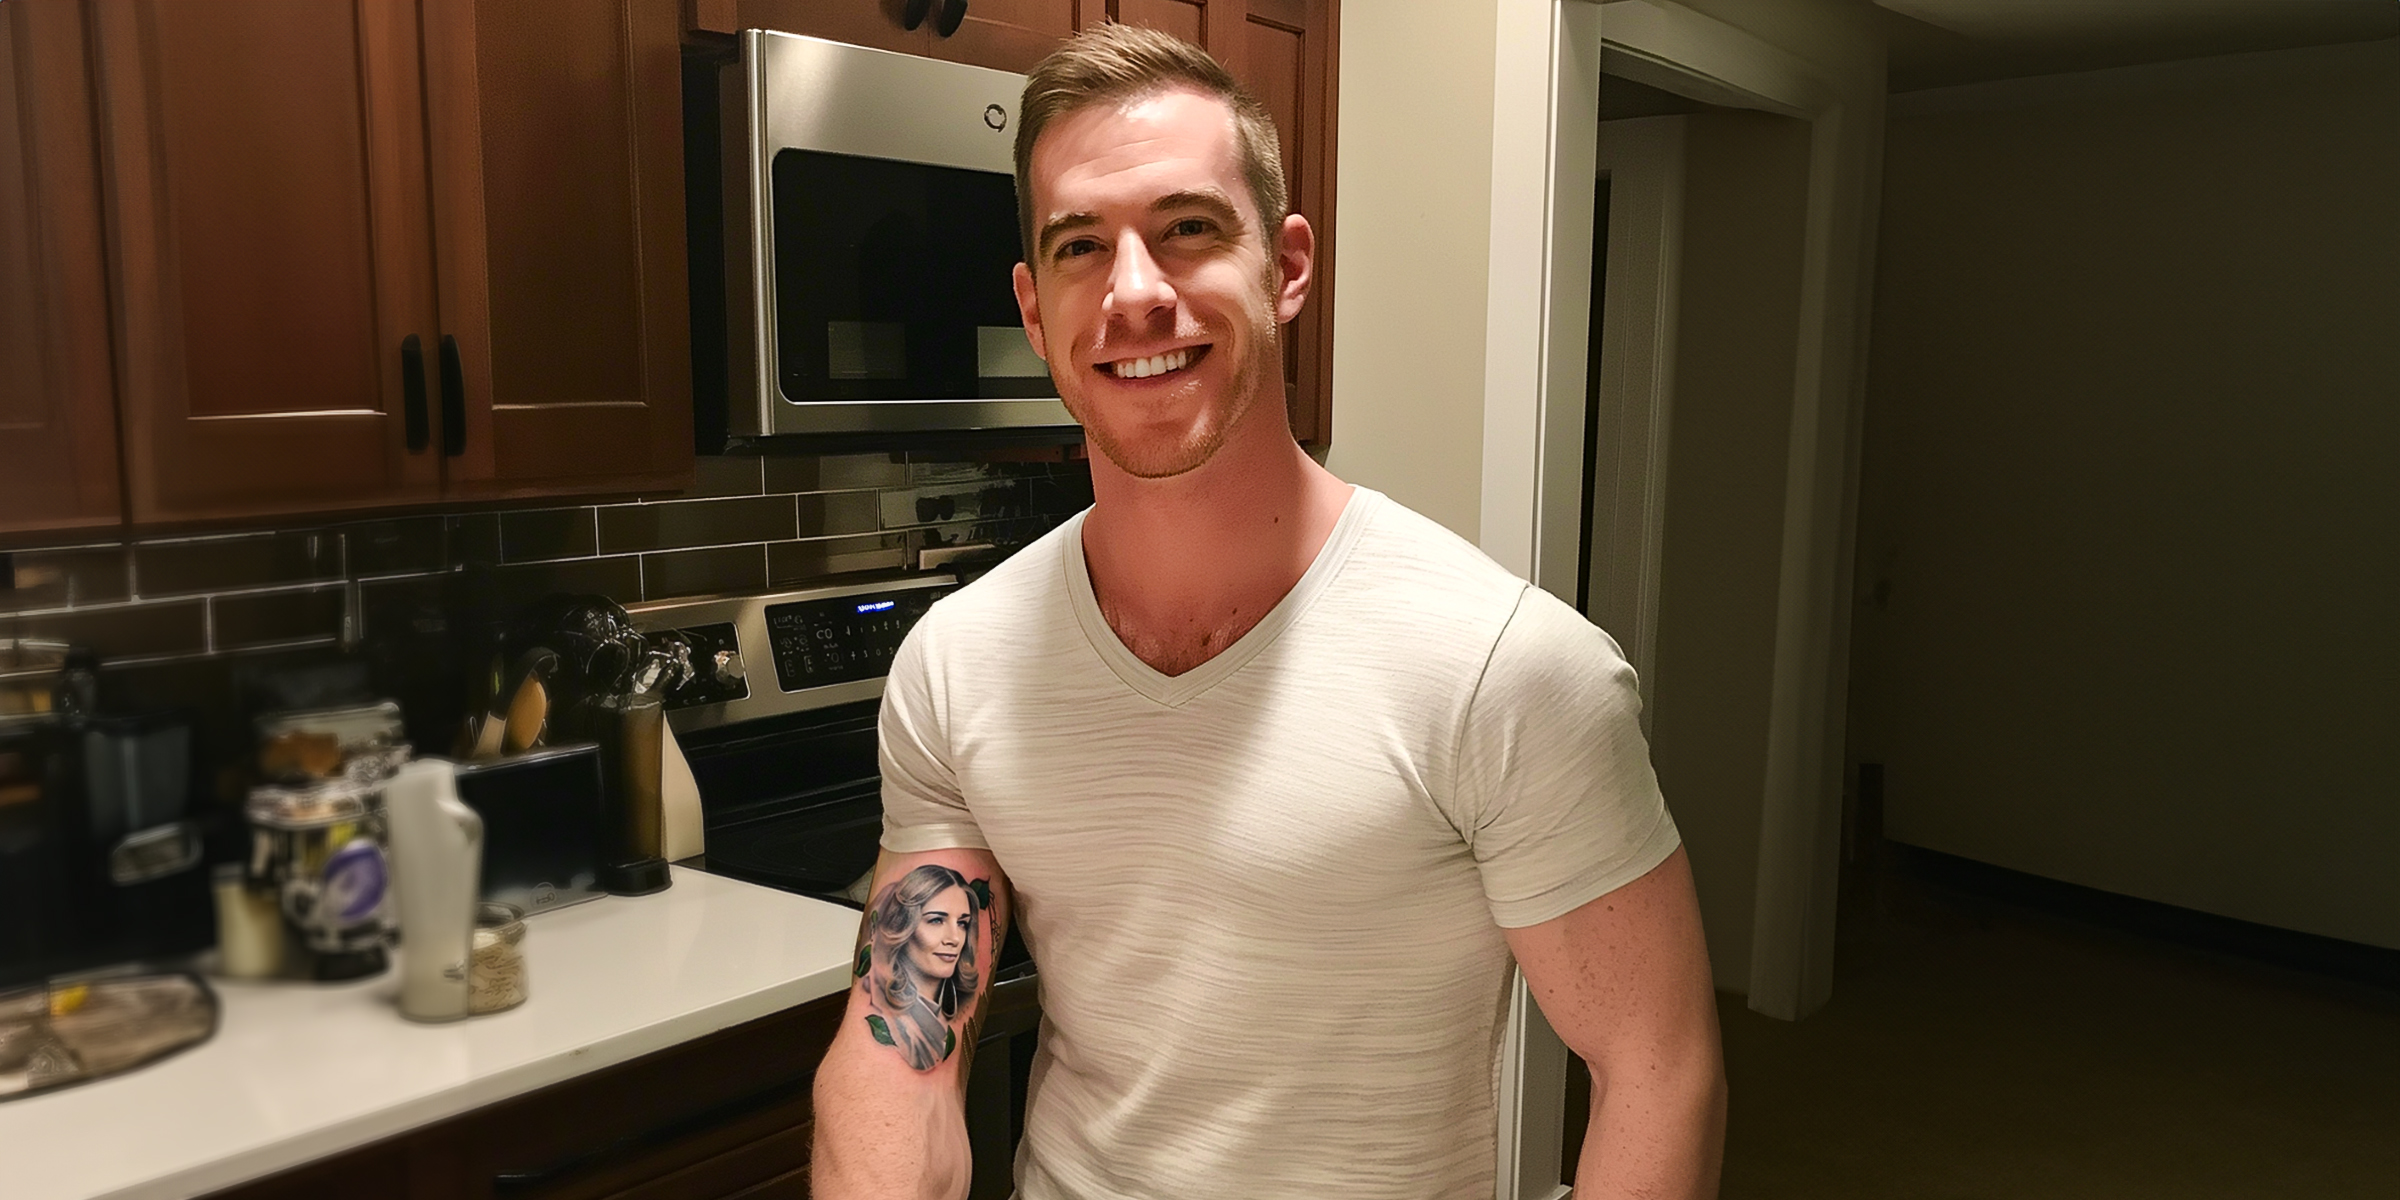 Man with a woman's face tattooed on his upper arm | Source: Amomama